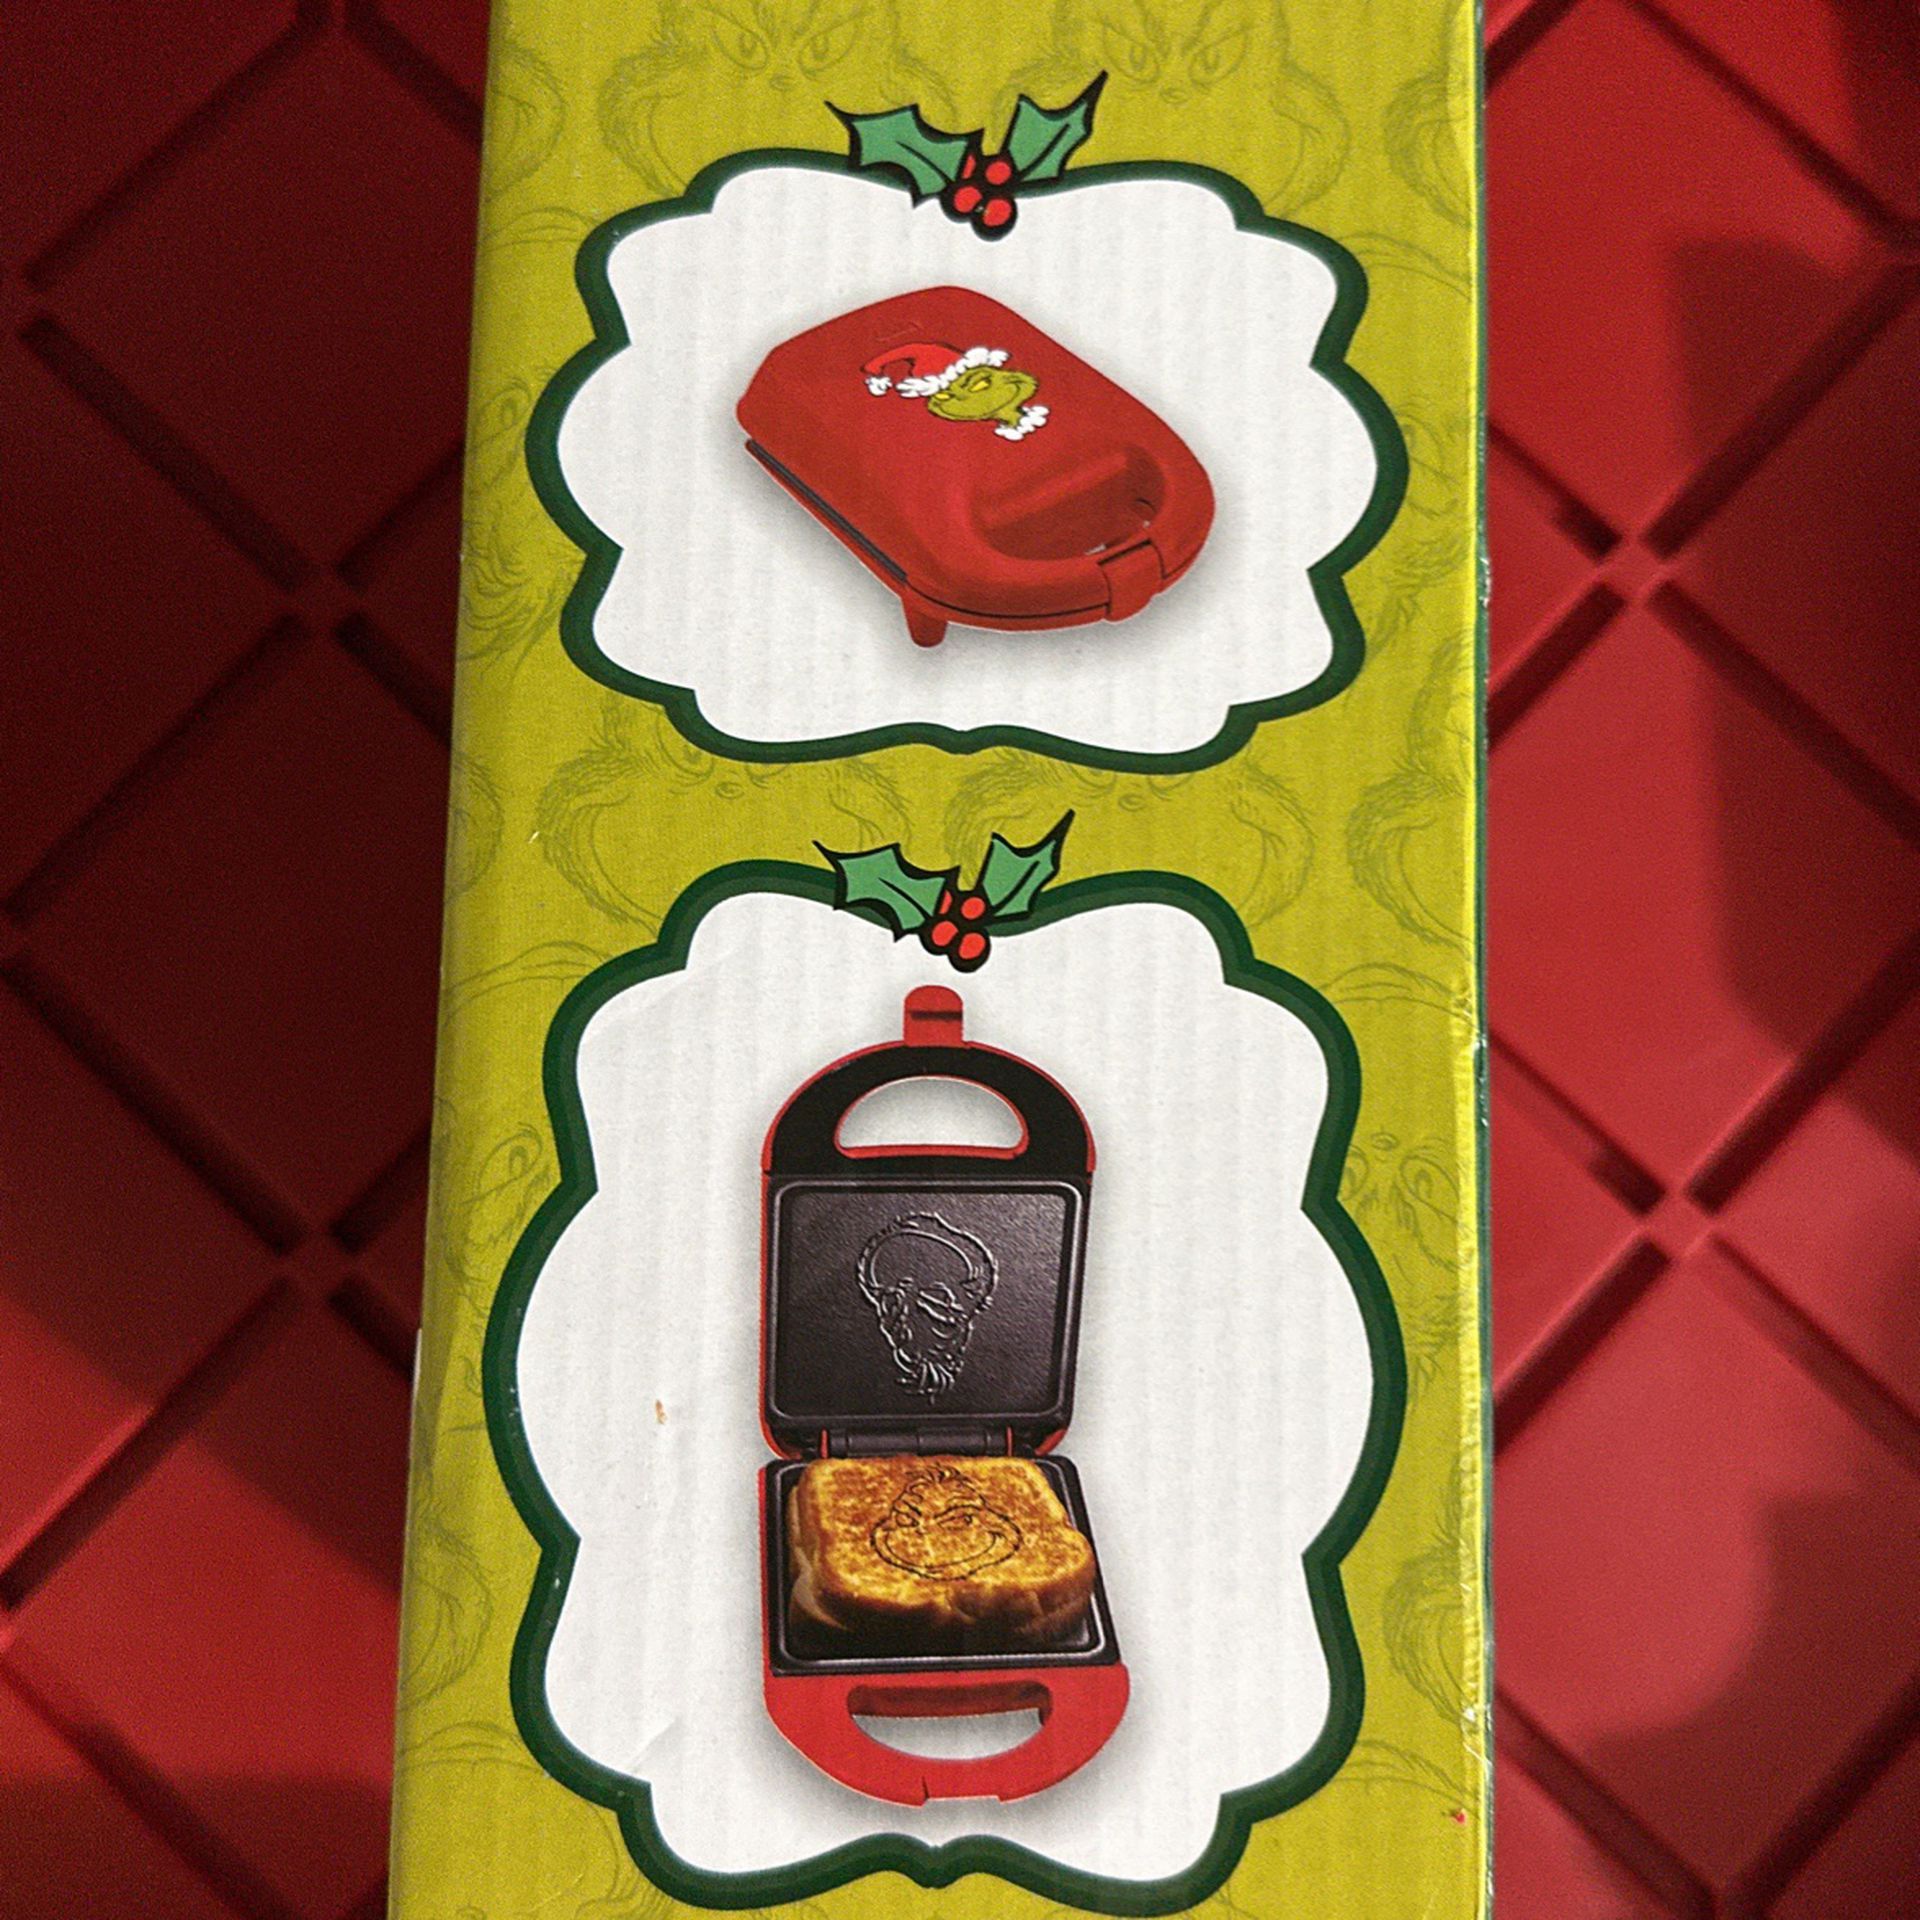 The Grinch grilled cheese sandwich maker｜TikTok Search